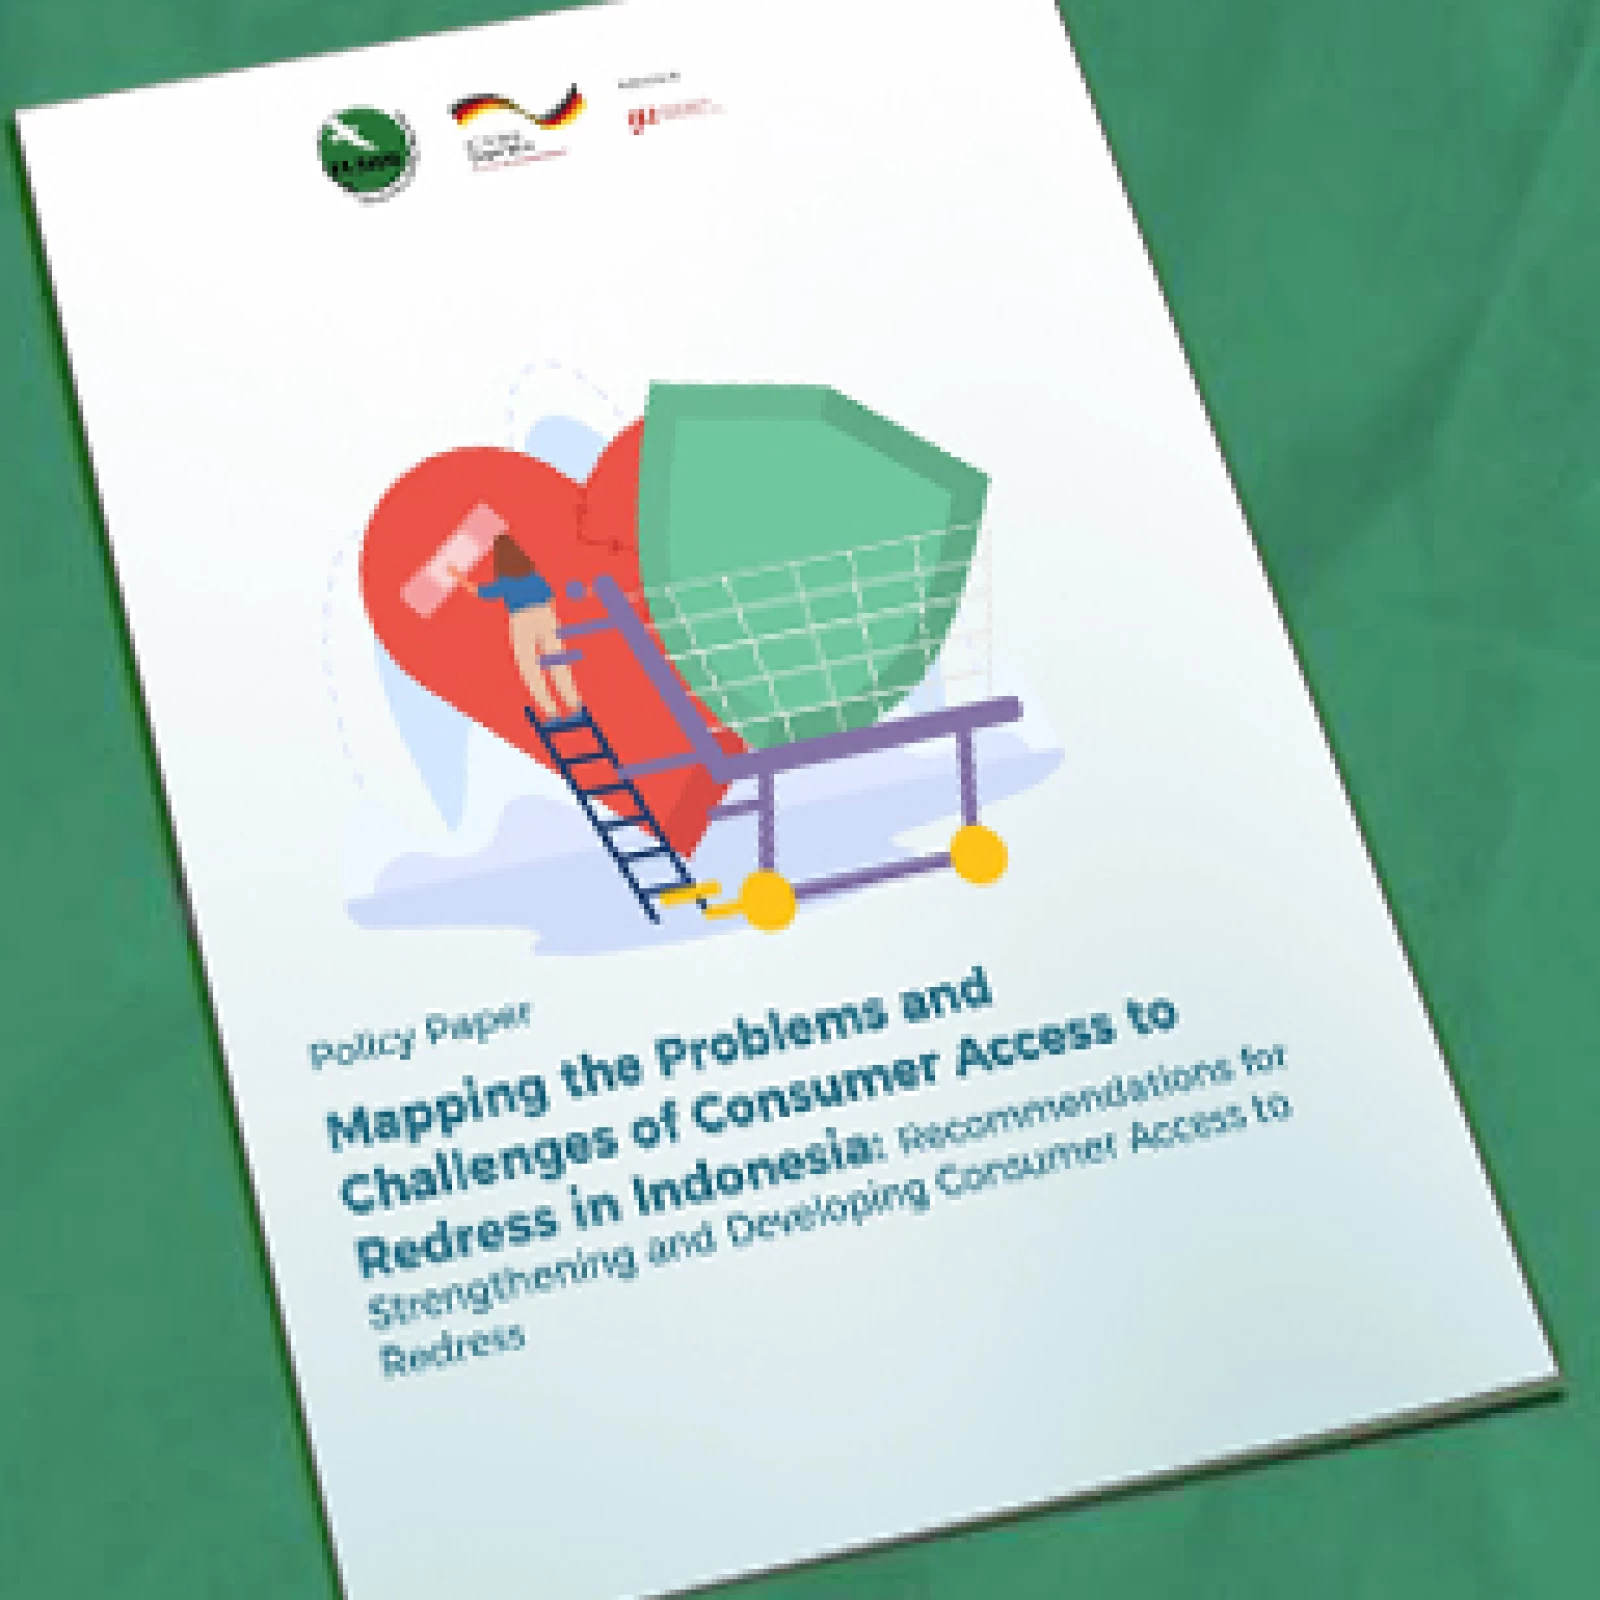 Mapping the Problems and Challenges of Consumer Access to Redress in Indonesia